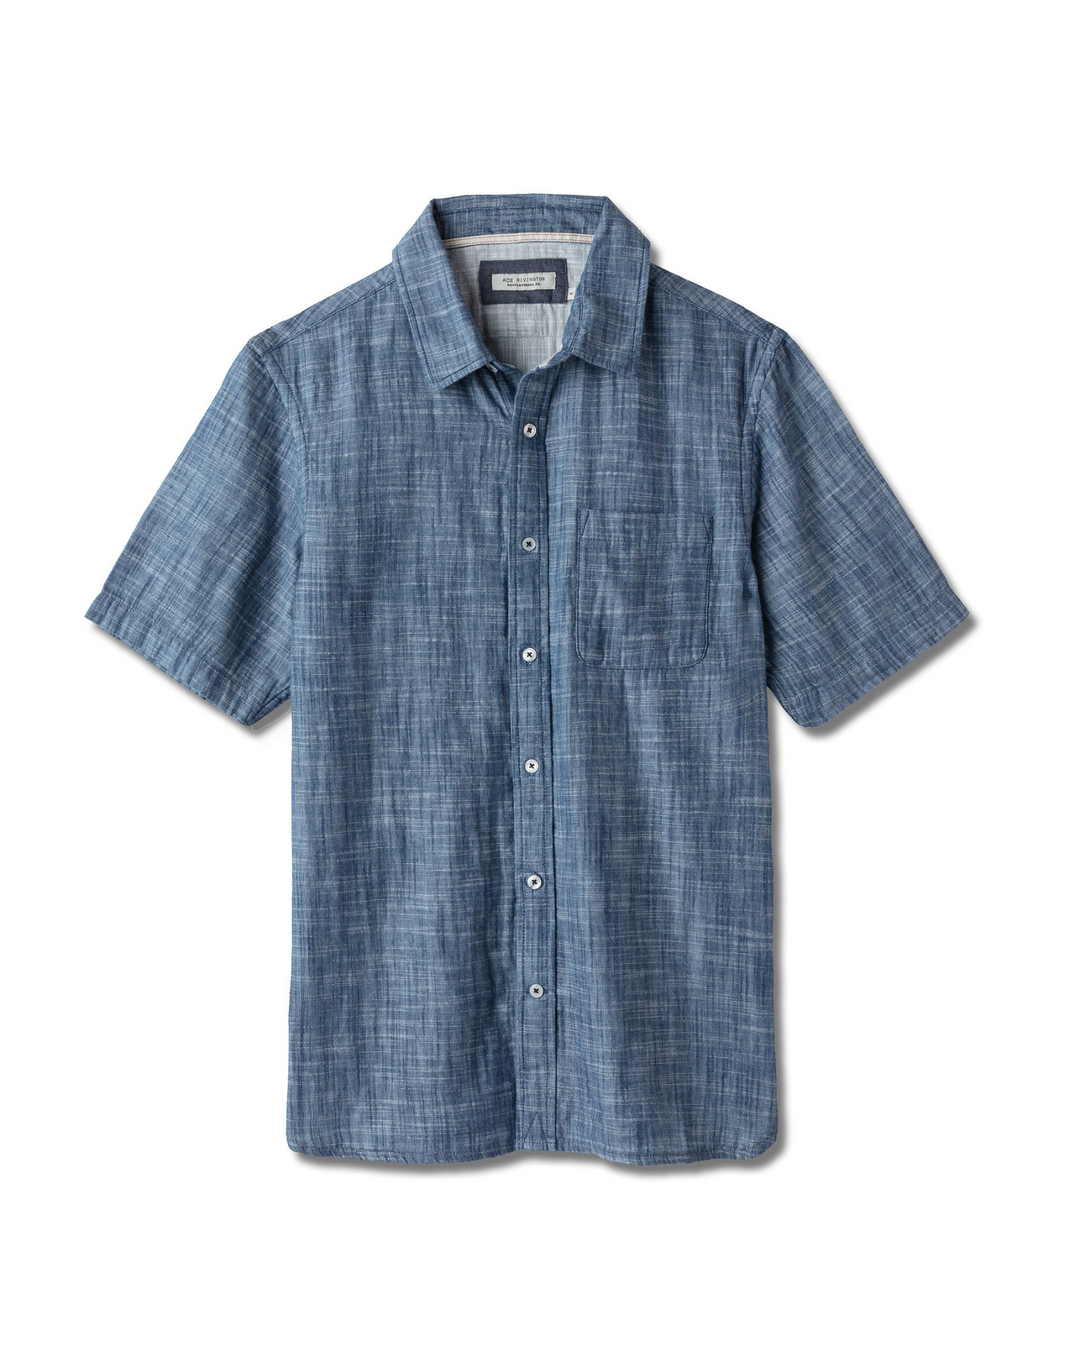 Full view flat lay of front of Ace Rivington short-sleeved indigo slub soft textured-cotton shirt with linen hand feel, pearl buttons, left-breast pocket, collar, and off white interior